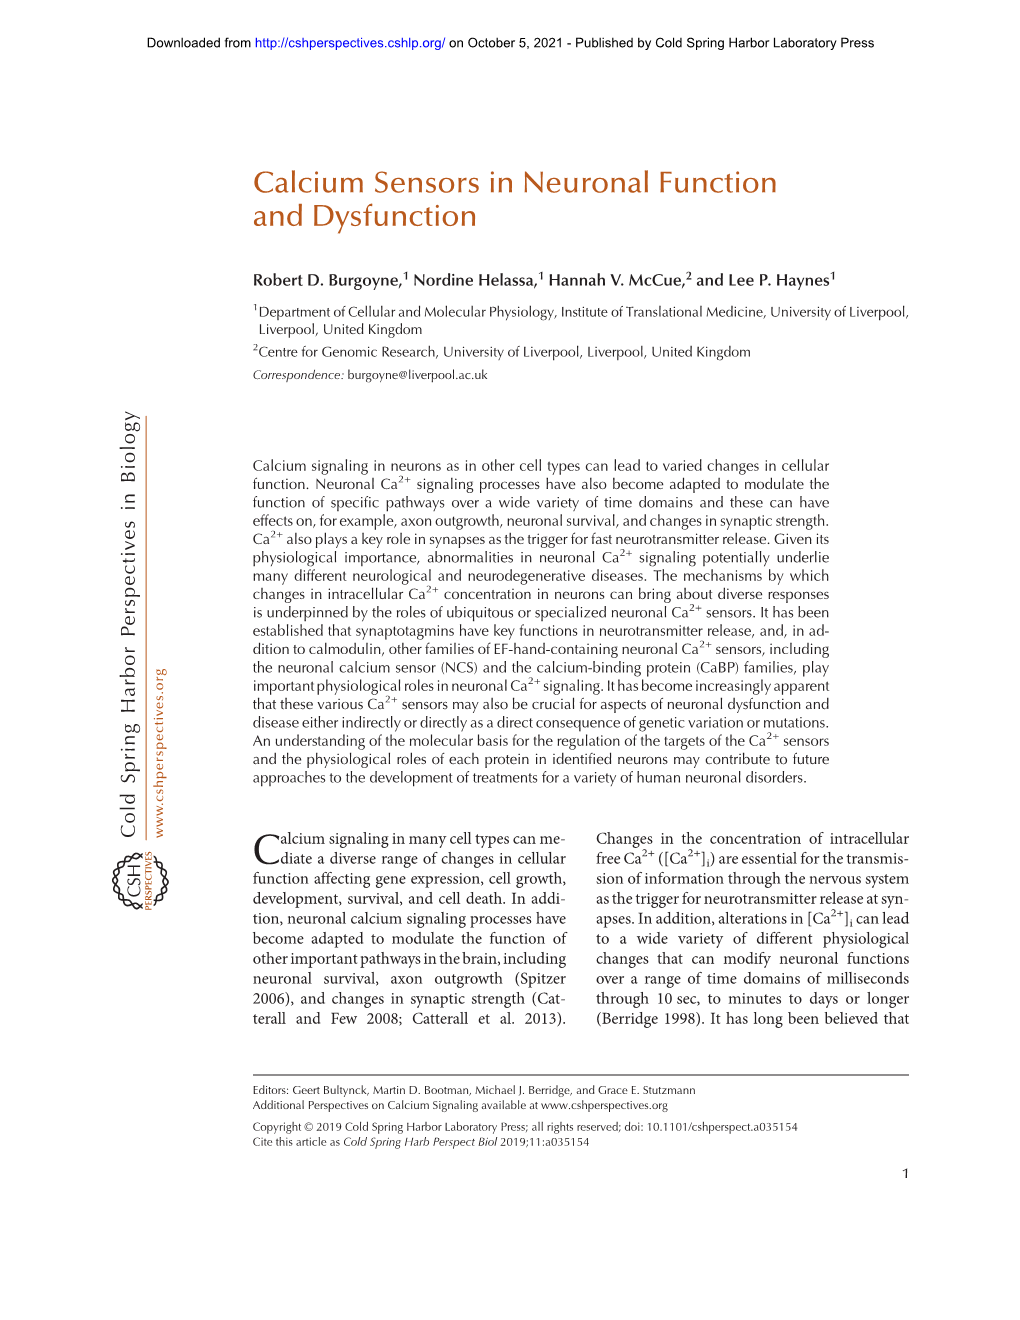 Calcium Sensors in Neuronal Function and Dysfunction